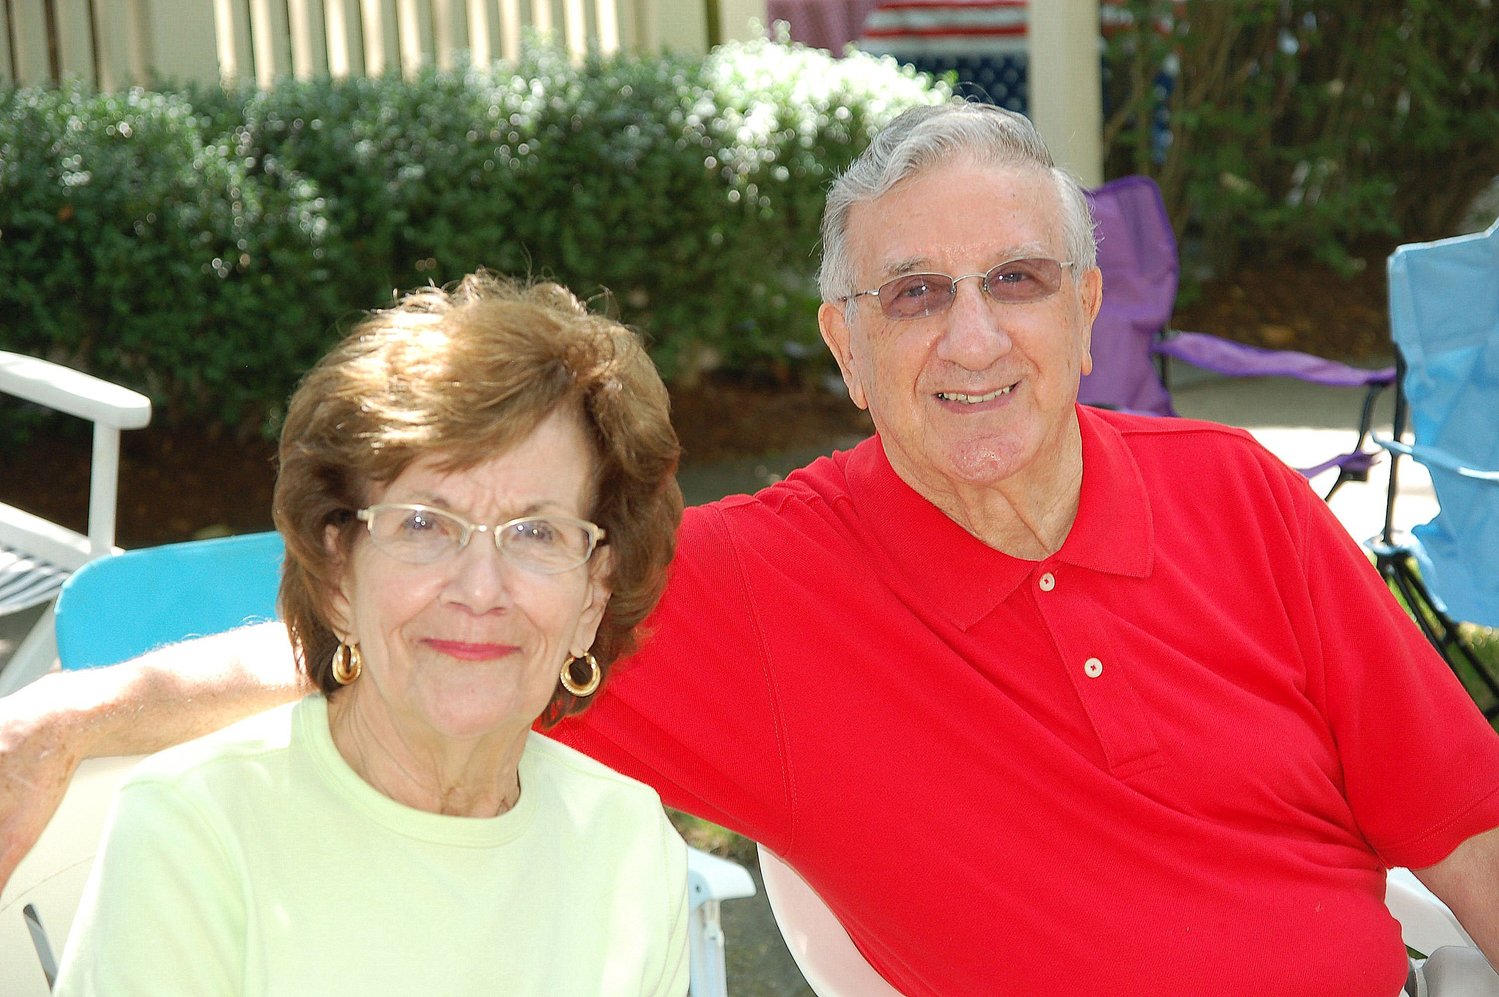 The late Marie Micheletti (left) was always accompanied by her beloved husband, Albert, no matter where the couple went.